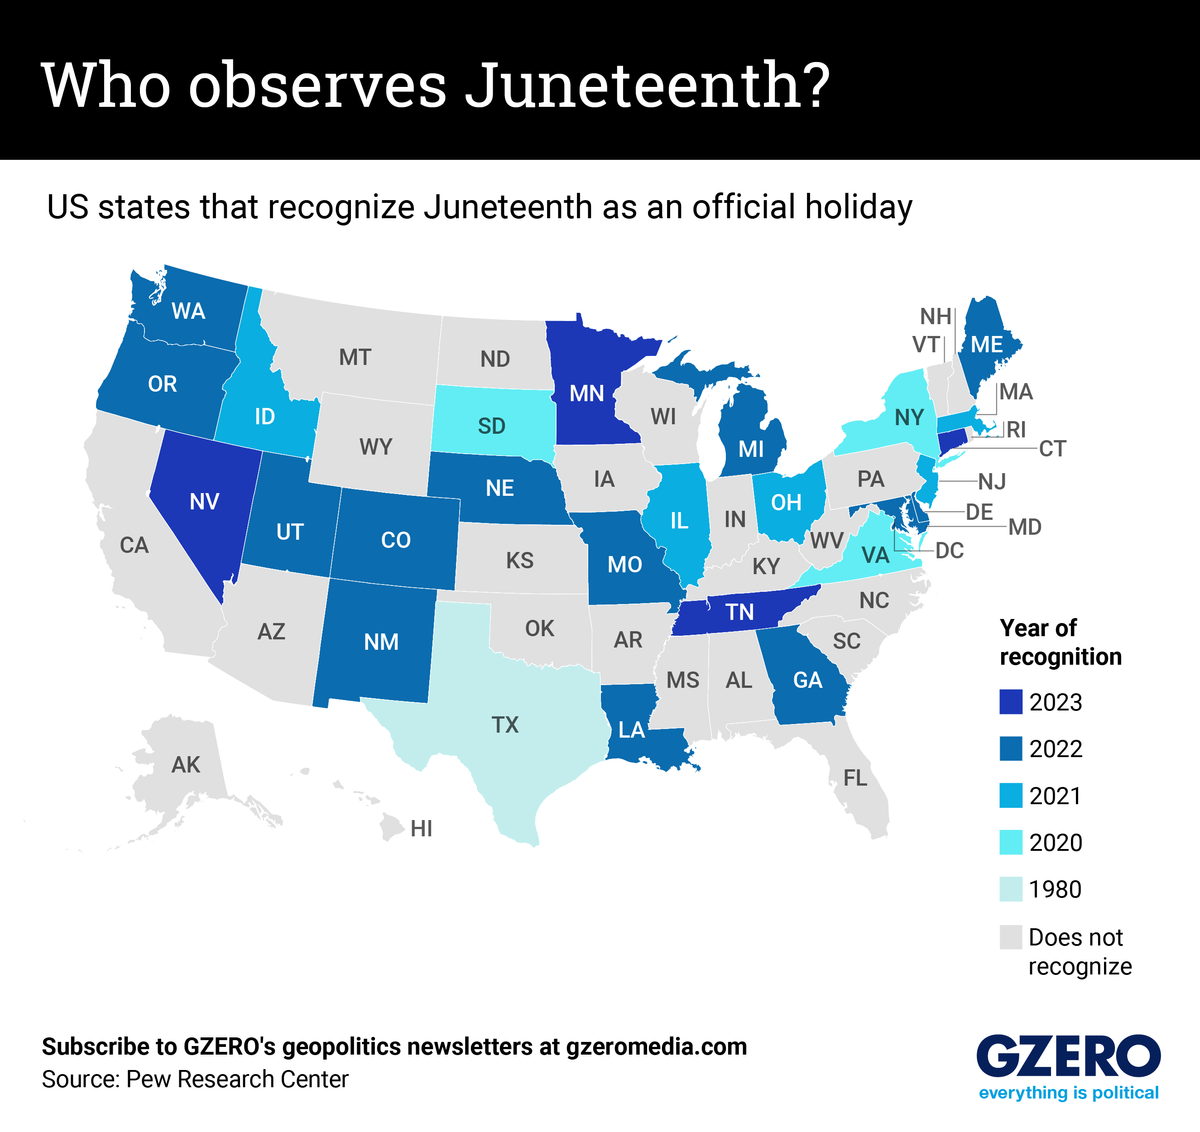 Map of US states that recognize Juneteenth as a state holiday